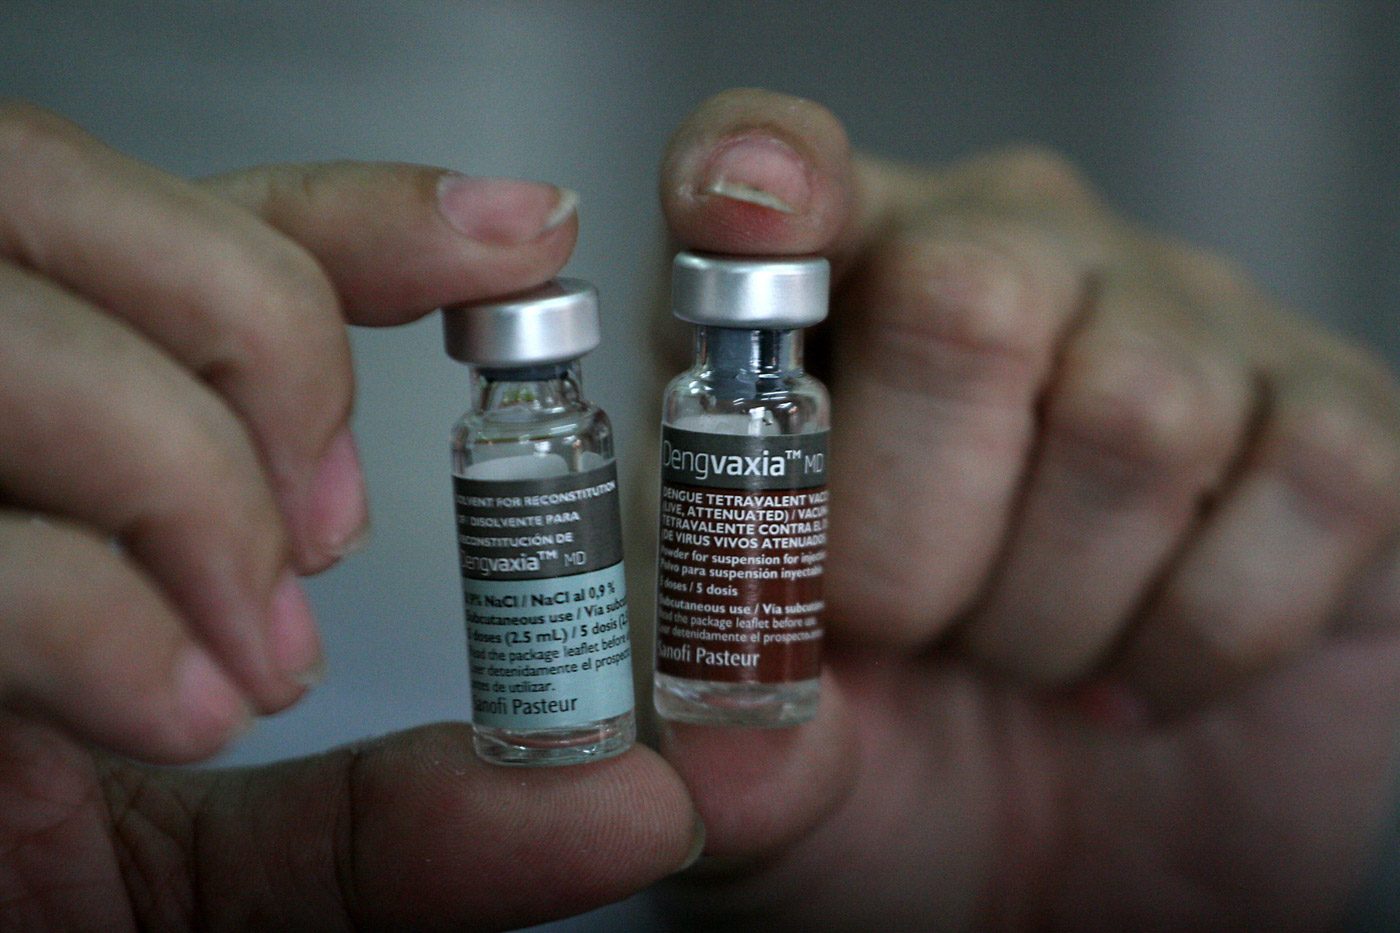 FDA orders market pullout of Dengvaxia vaccine